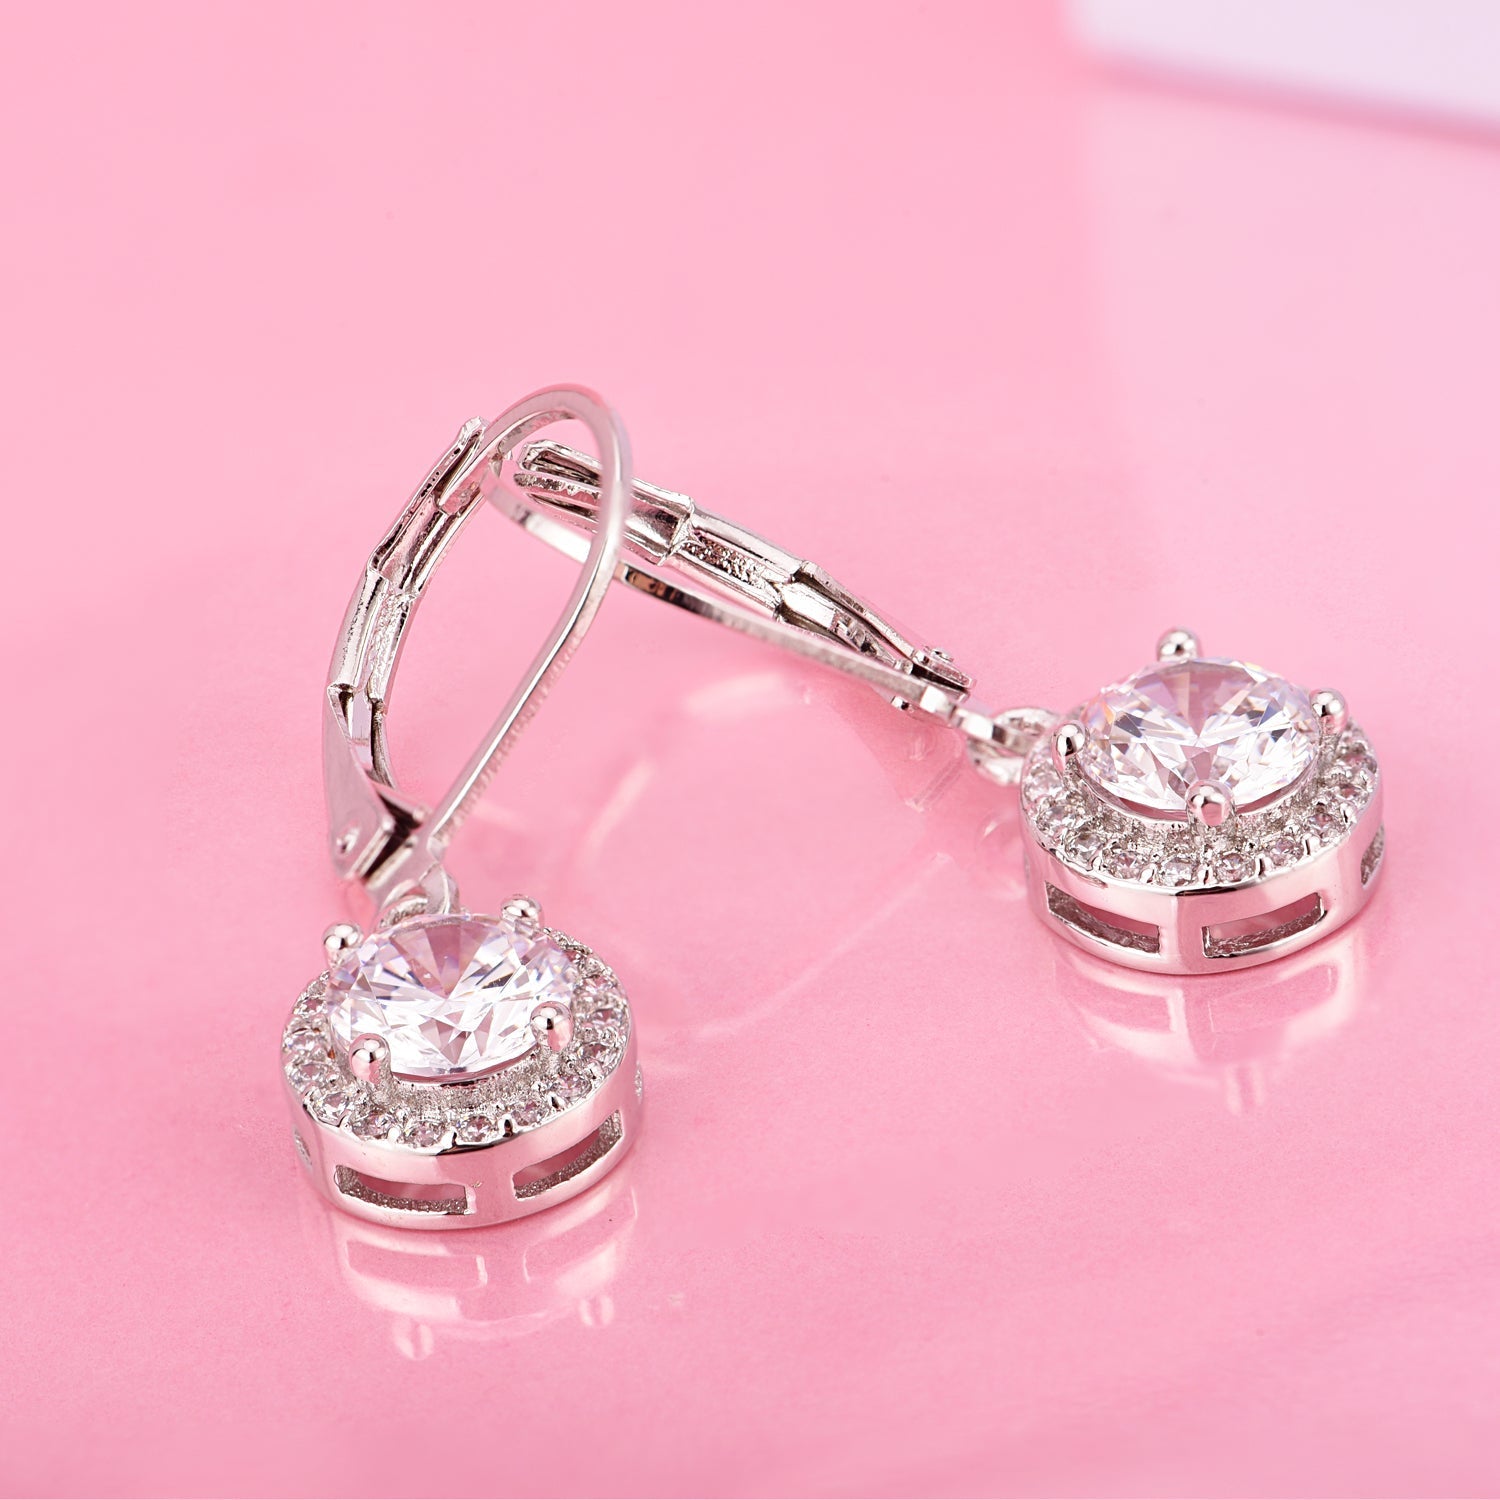 Genuine Crystal Halo Leverback Earrings in 18K White Gold - Tuesday Morning-Leverback Earrings